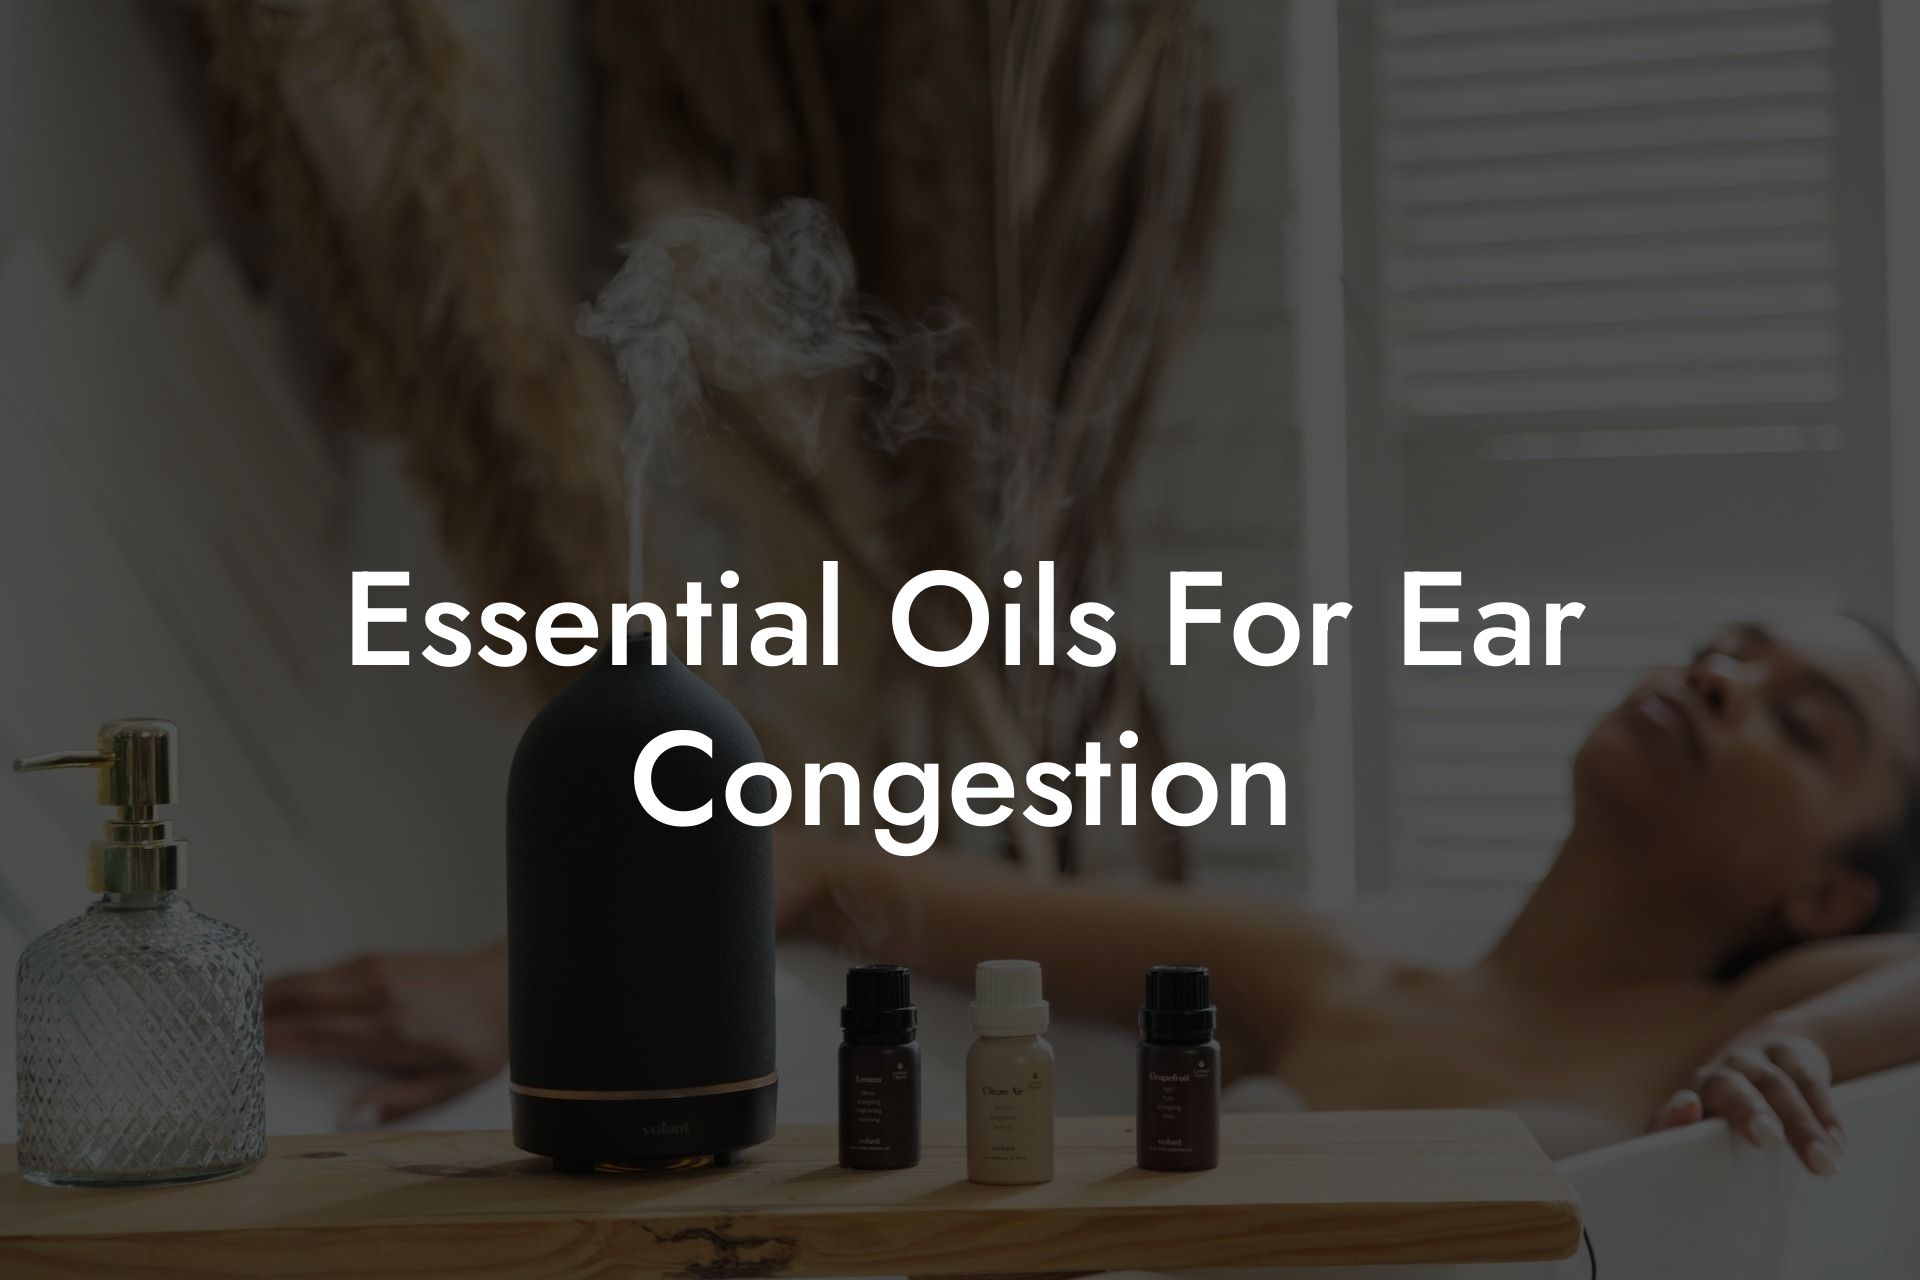 Essential Oils For Ear Congestion